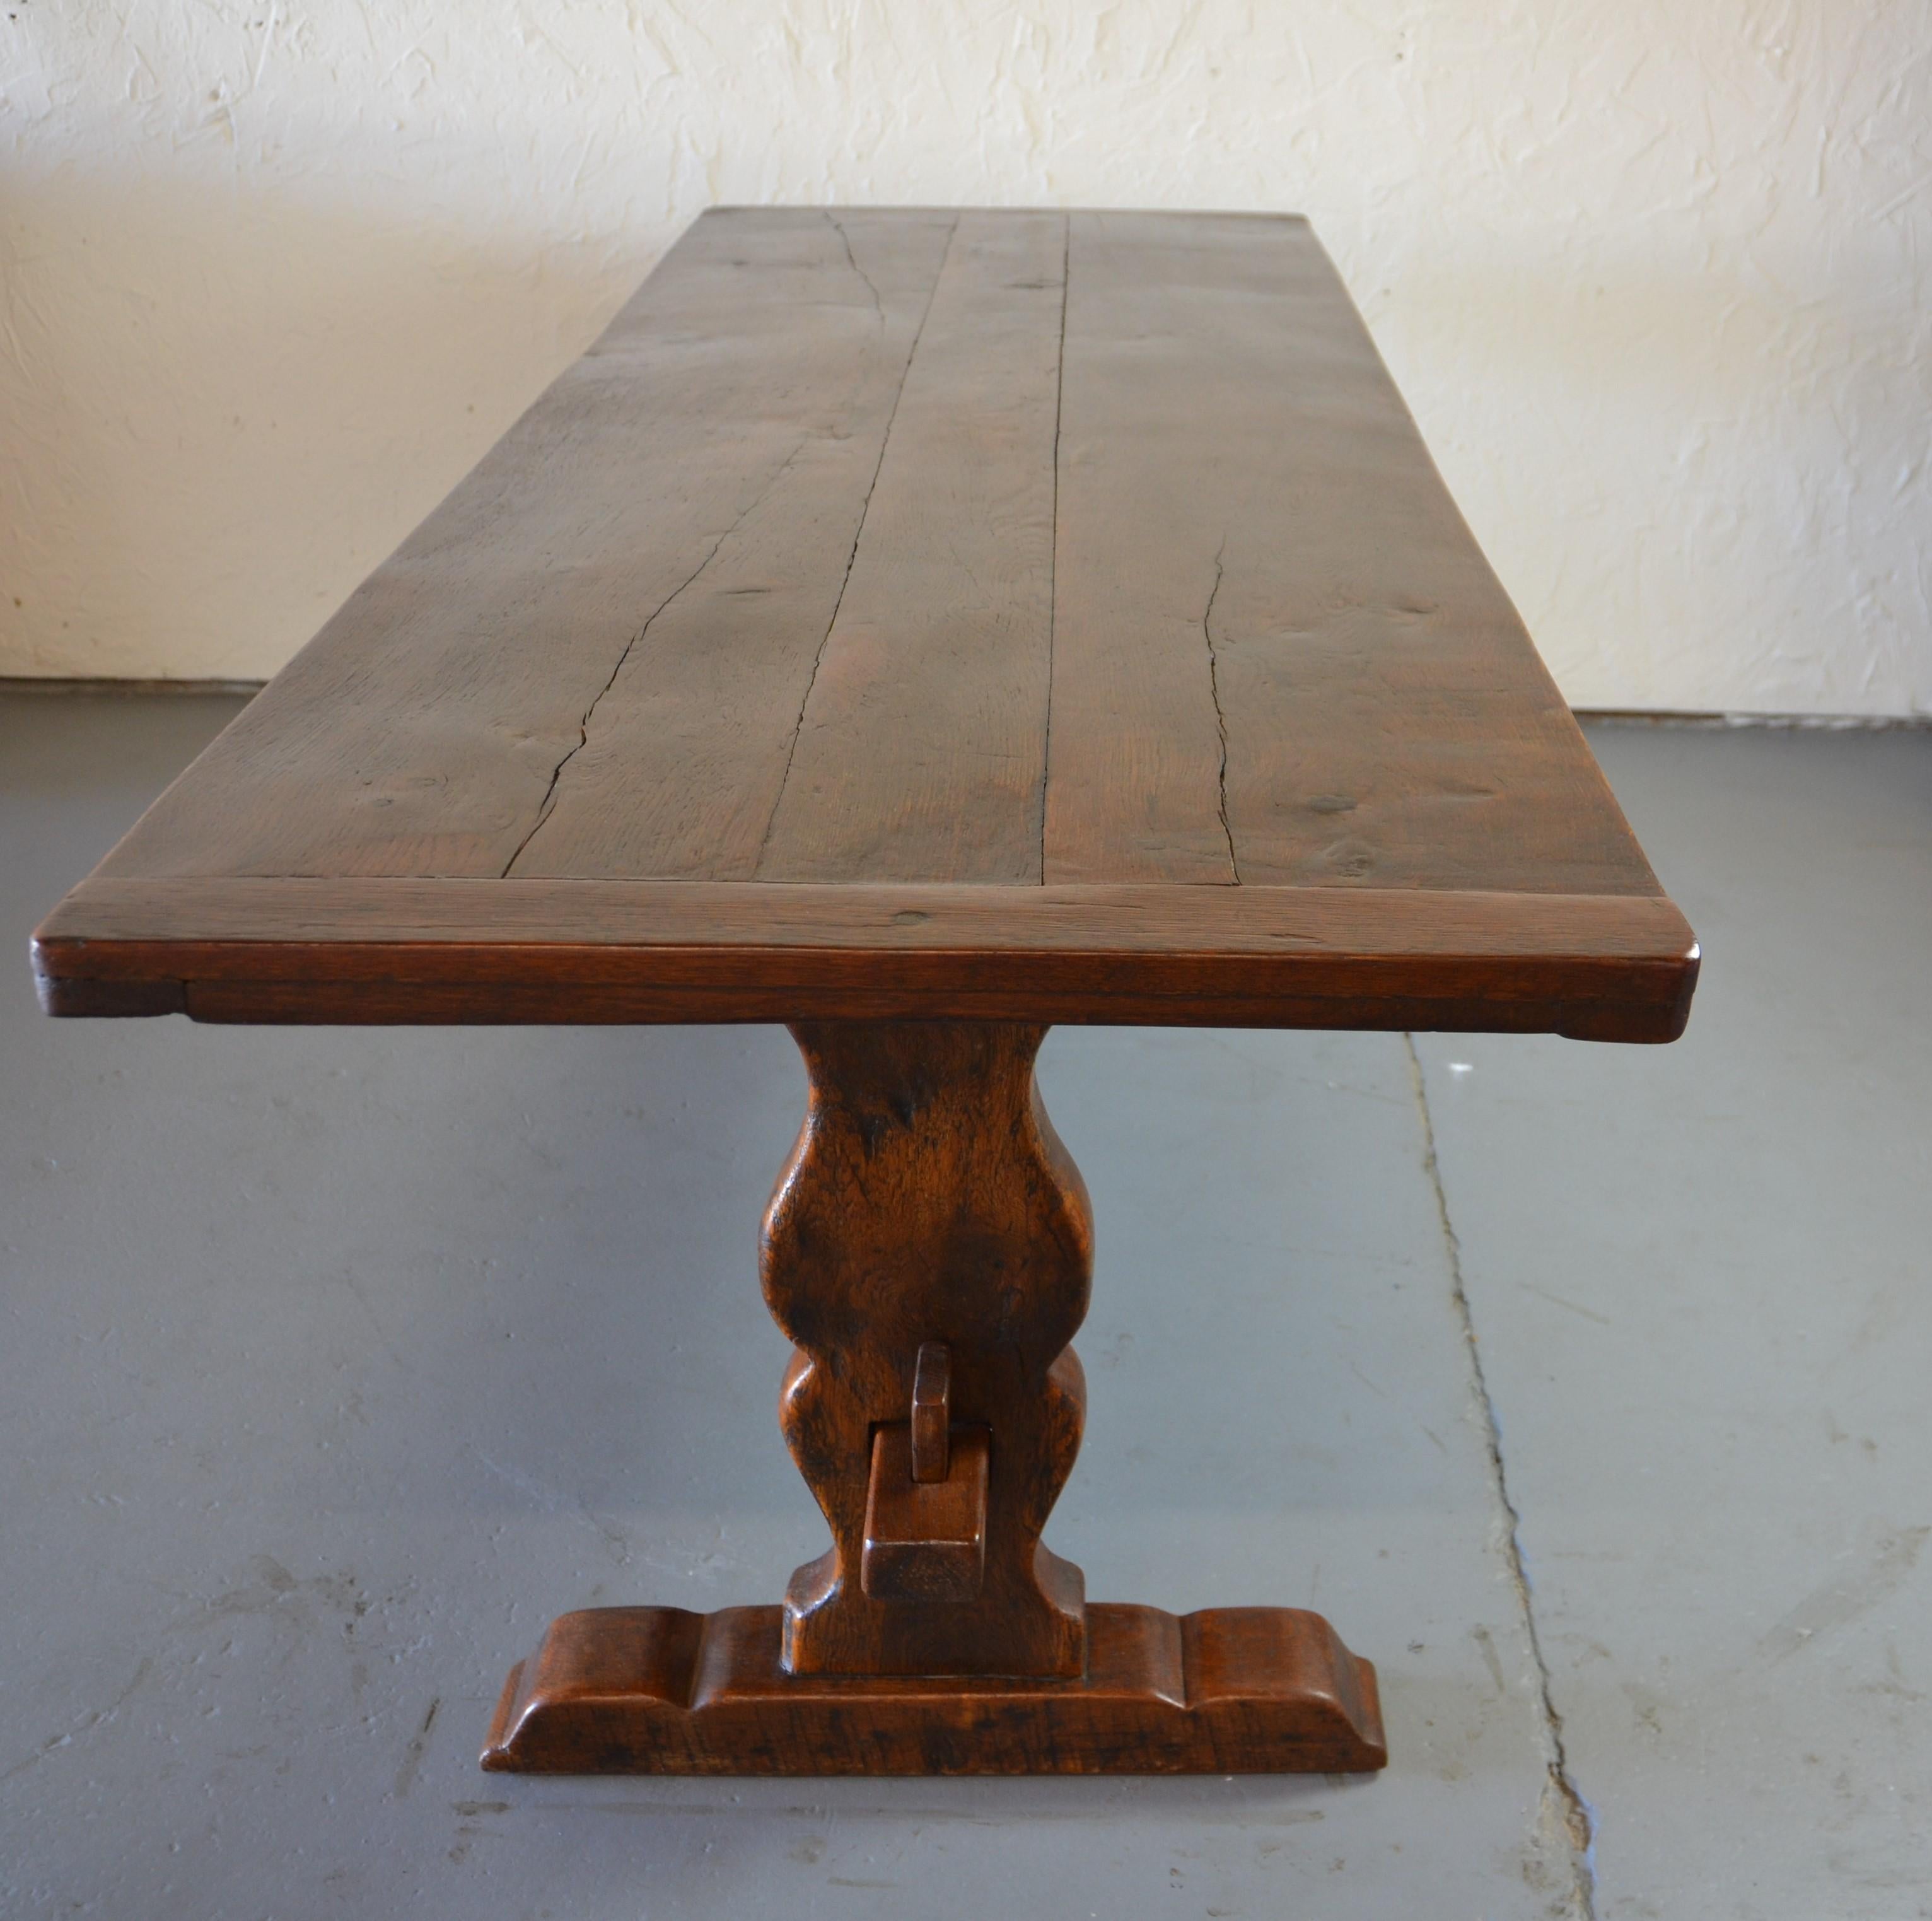 c1720 Refectory Table in the 